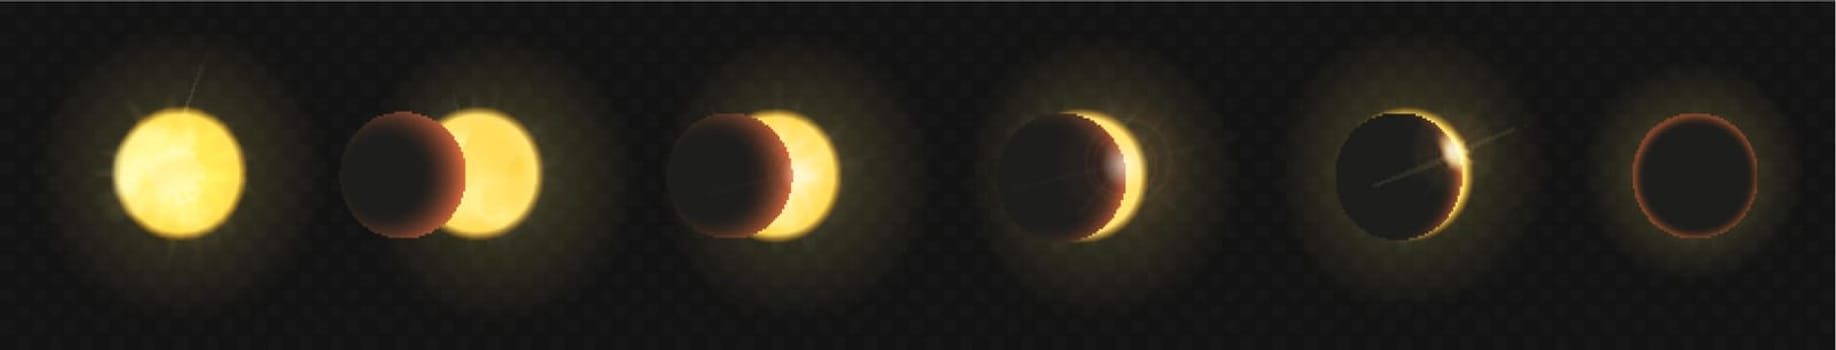 Solar eclipse set, process or stages of partial and complete eclipse cycle of sun by moon